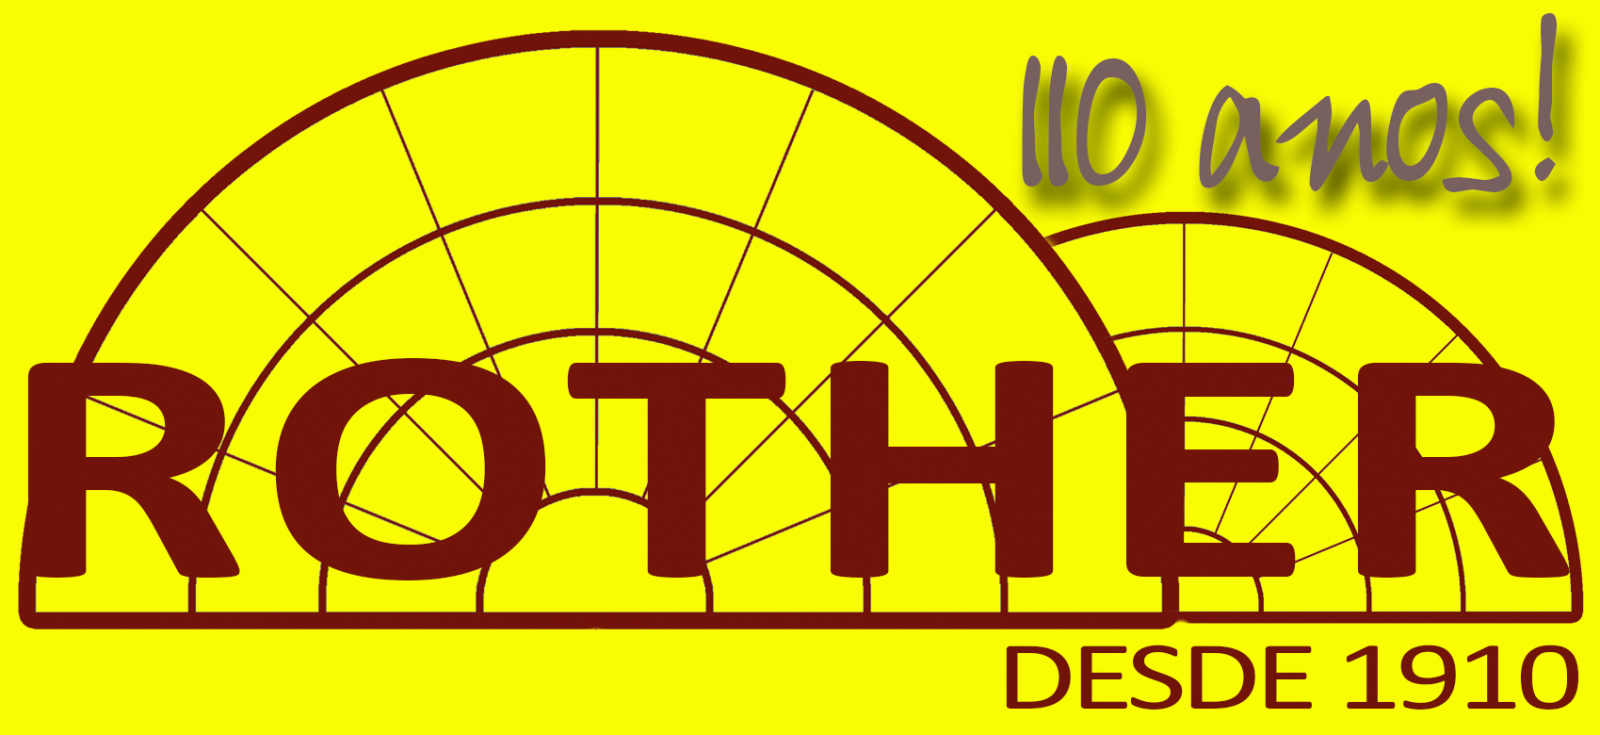 Rother 110 Anos